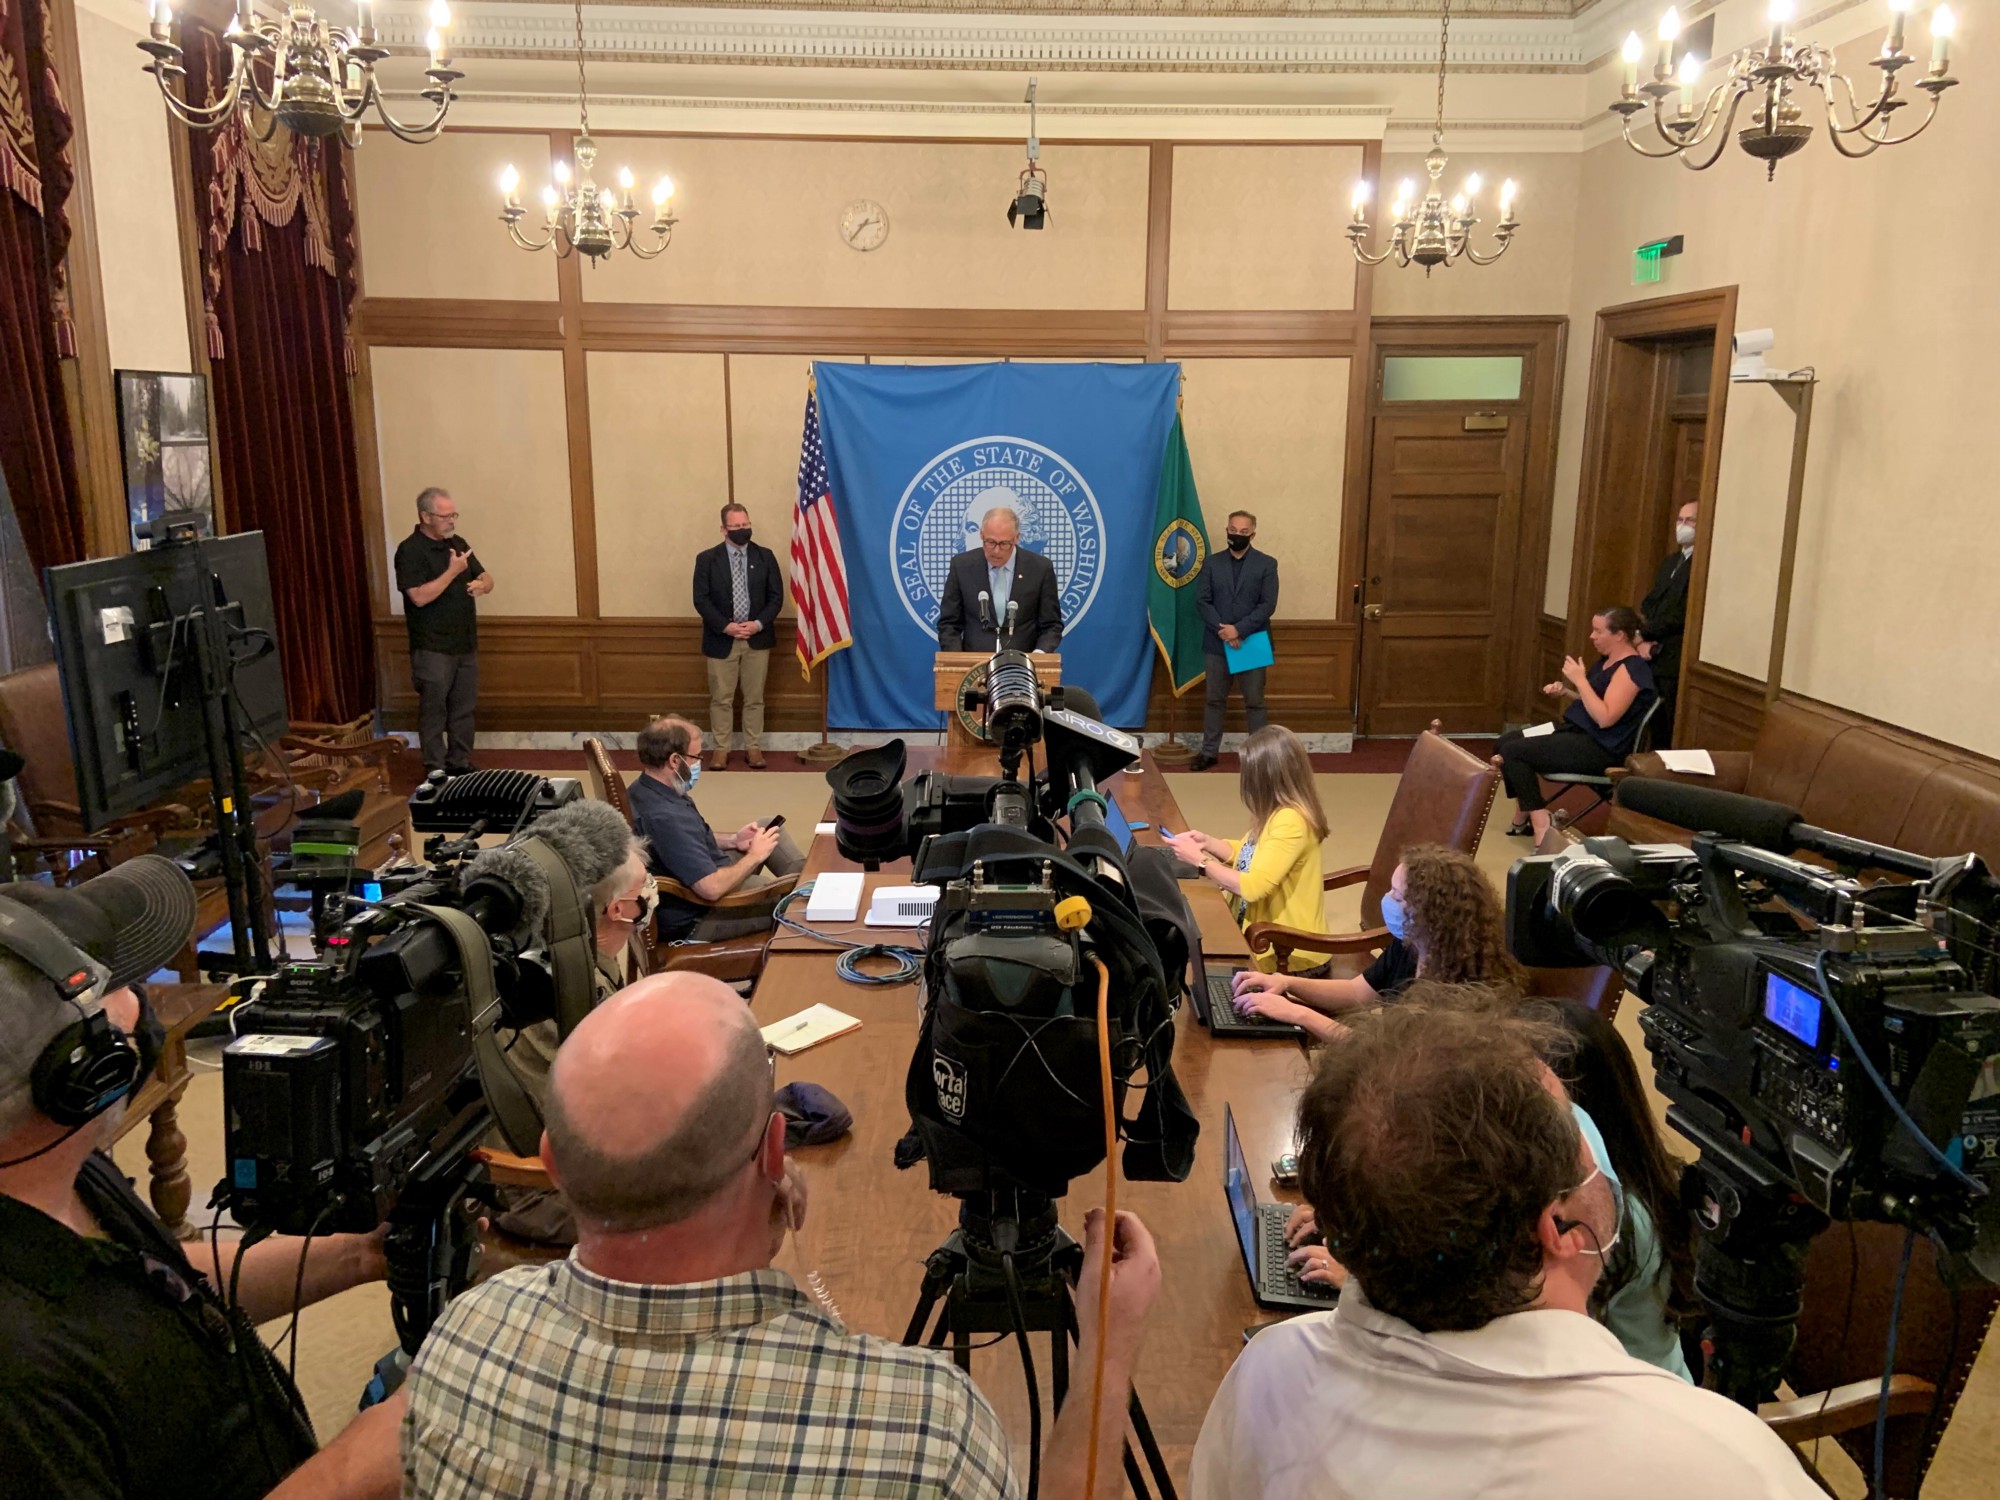 Governor Inslee announces new masking and vaccination requirements